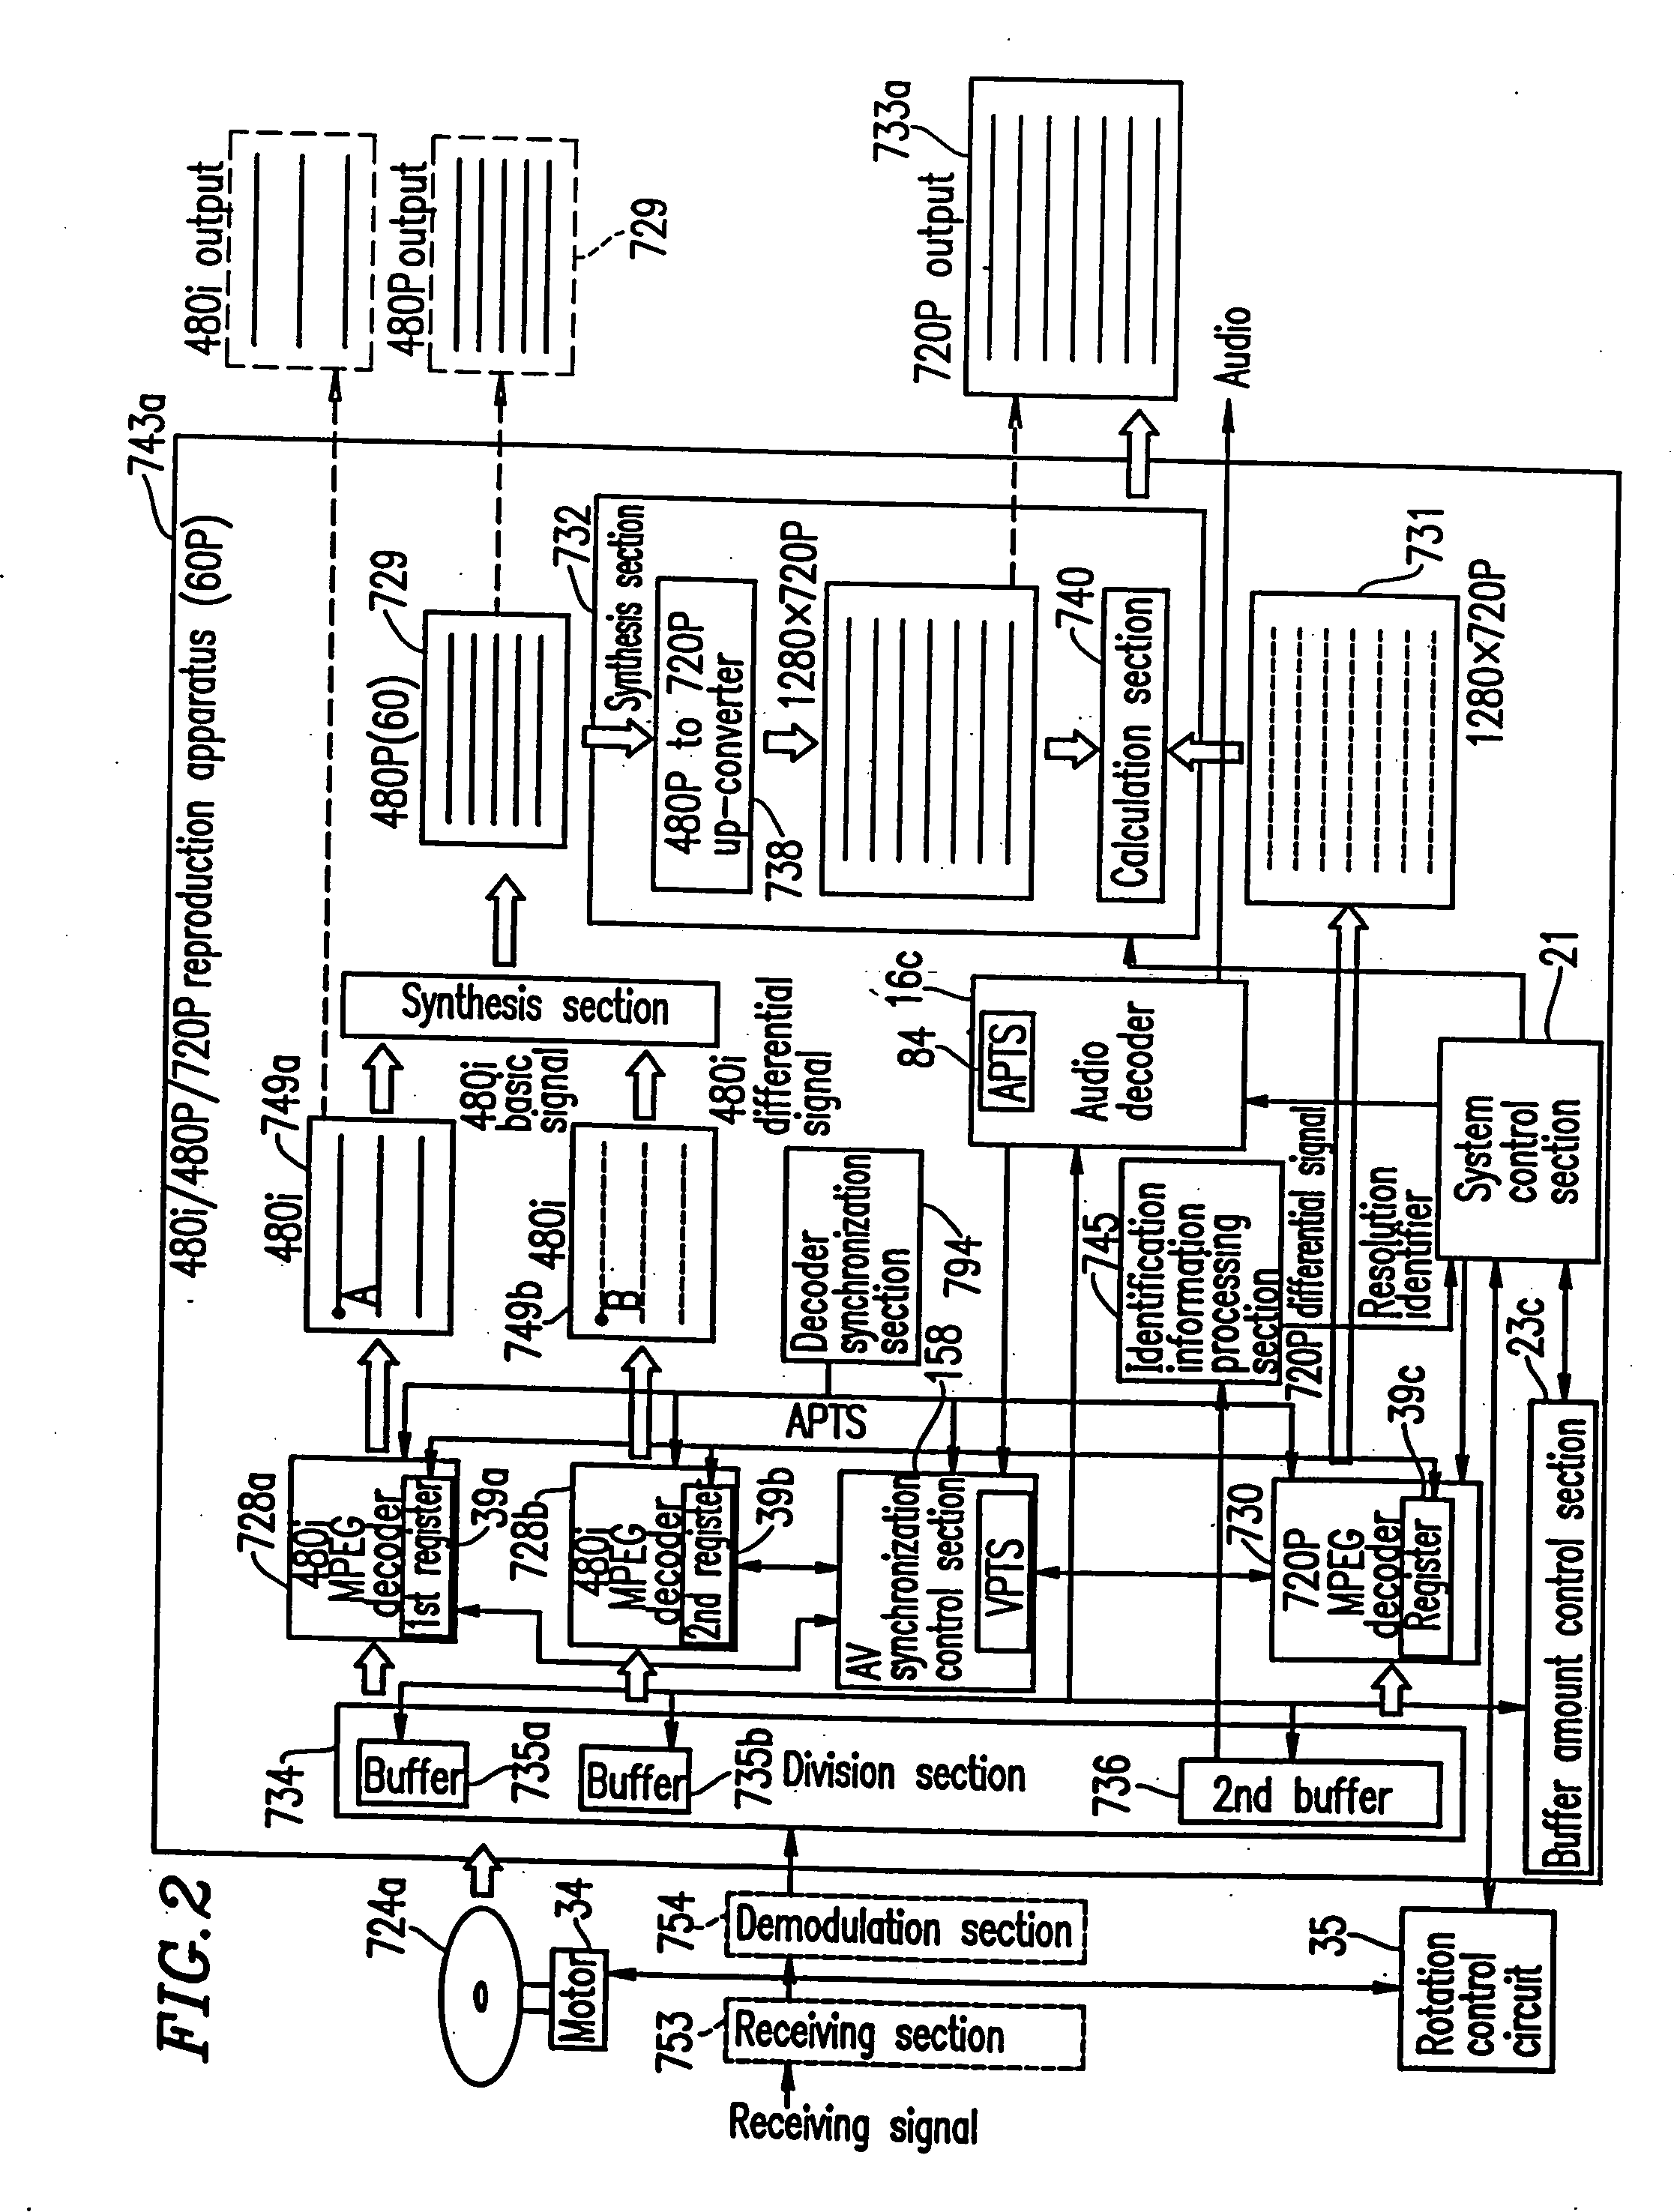 Optical disk for high resolution and general video recording, optical disk reproduction apparatus, optical disk recording apparatus, and reproduction control information generation apparatus